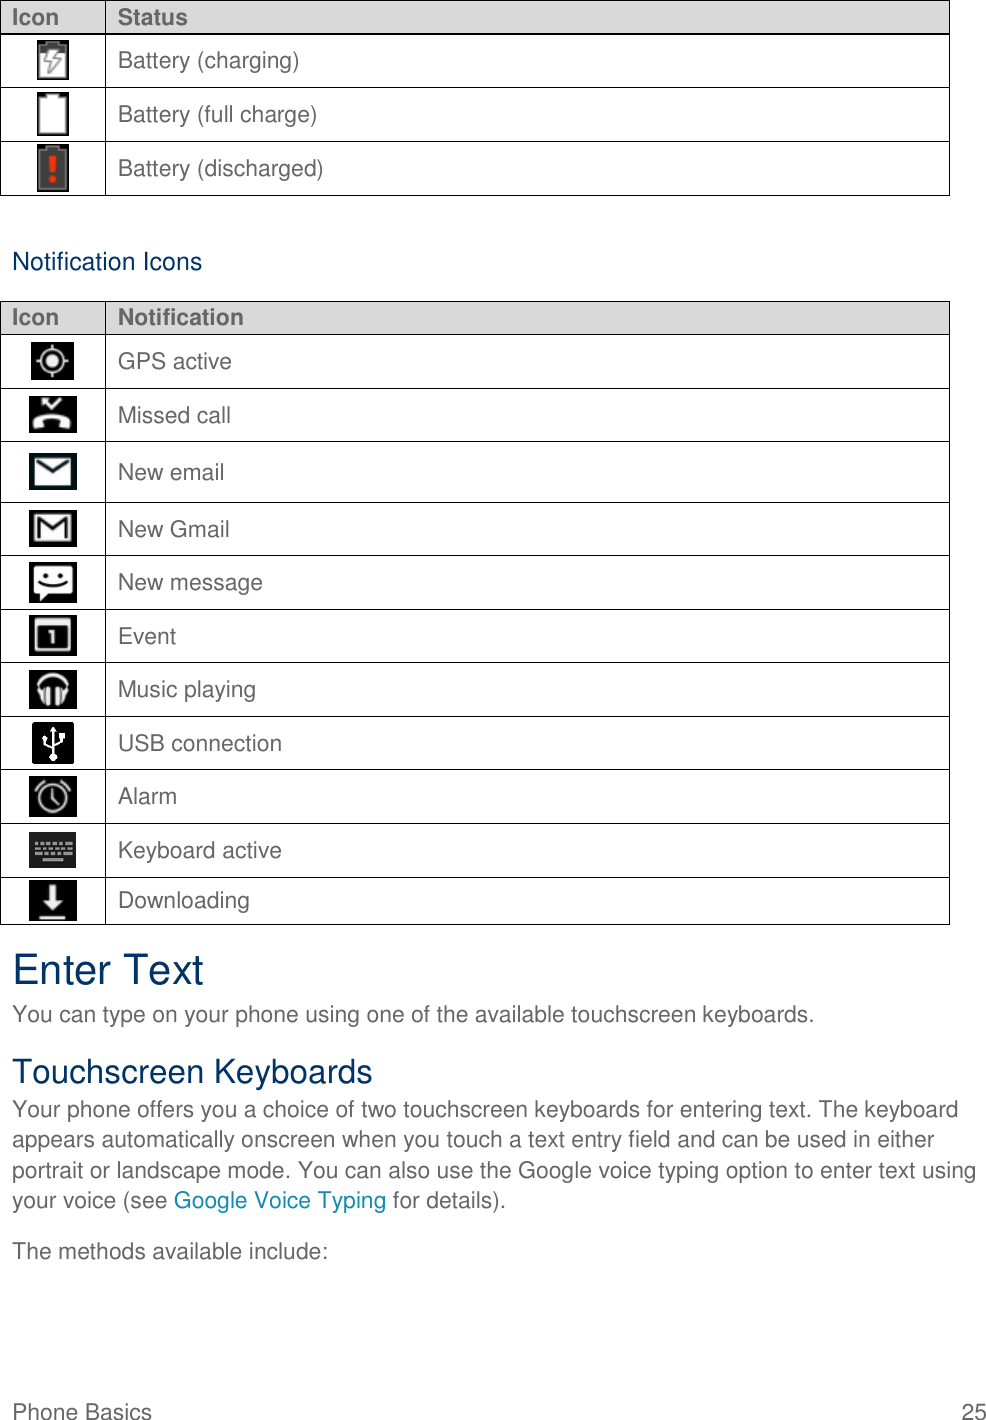 Phone Basics  25 Icon Status  Battery (charging)  Battery (full charge)  Battery (discharged)  Notification Icons Icon Notification  GPS active  Missed call  New email  New Gmail  New message  Event  Music playing  USB connection  Alarm  Keyboard active  Downloading Enter Text You can type on your phone using one of the available touchscreen keyboards. Touchscreen Keyboards Your phone offers you a choice of two touchscreen keyboards for entering text. The keyboard appears automatically onscreen when you touch a text entry field and can be used in either portrait or landscape mode. You can also use the Google voice typing option to enter text using your voice (see Google Voice Typing for details). The methods available include: 